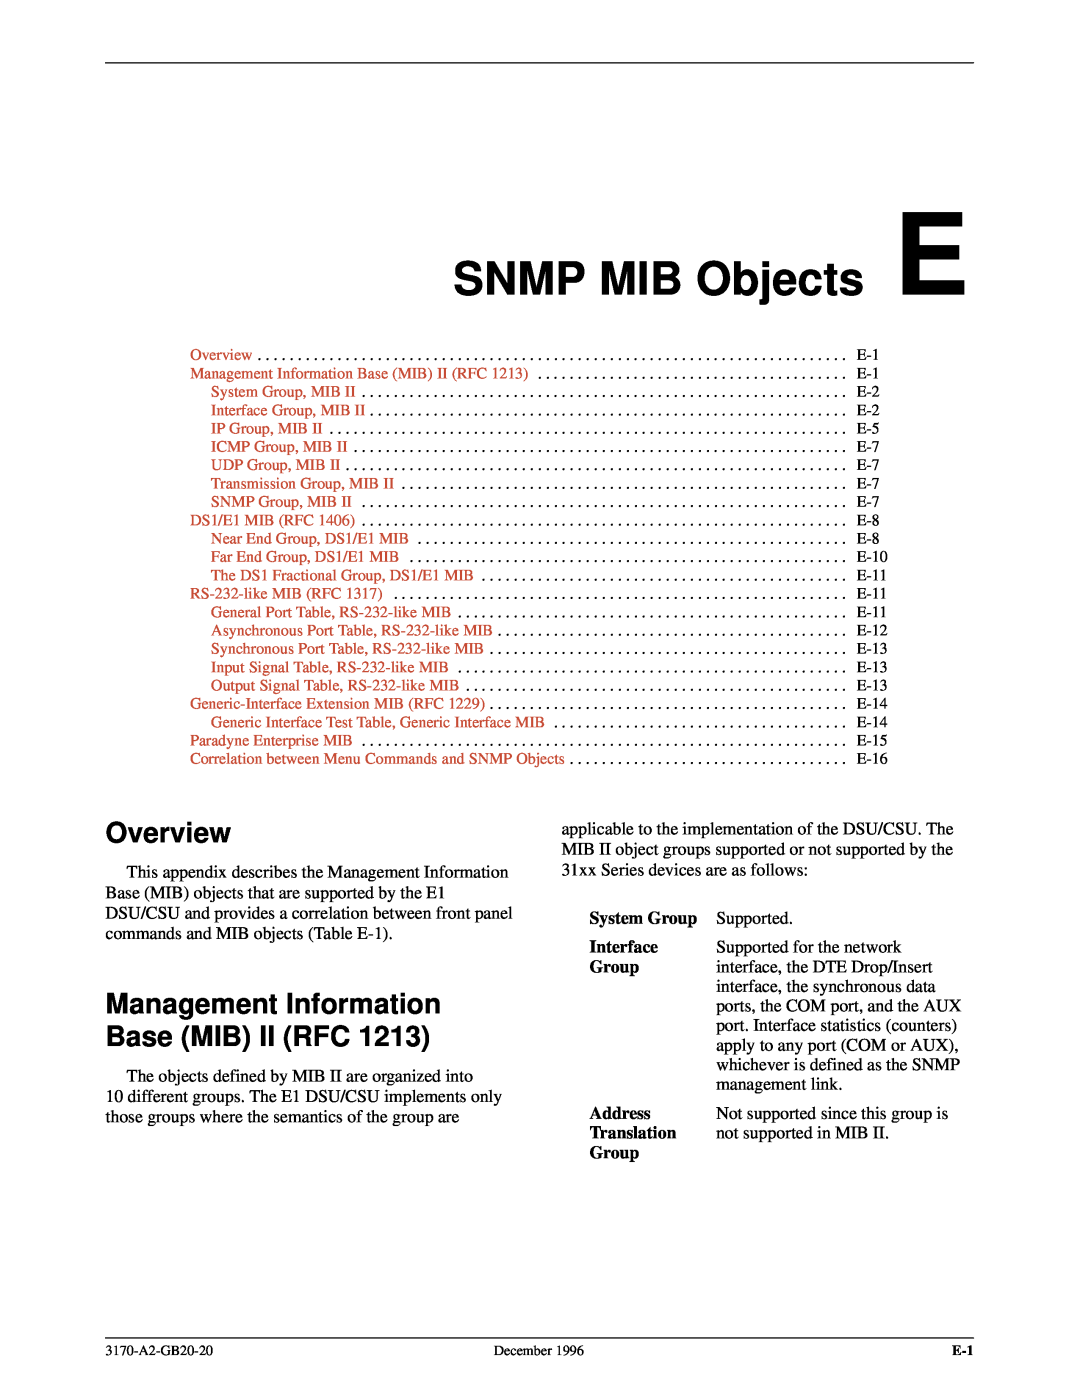 Paradyne 317x E1 manual SNMP MIB Objects E, Management Information Base MIB II RFC, Overview 